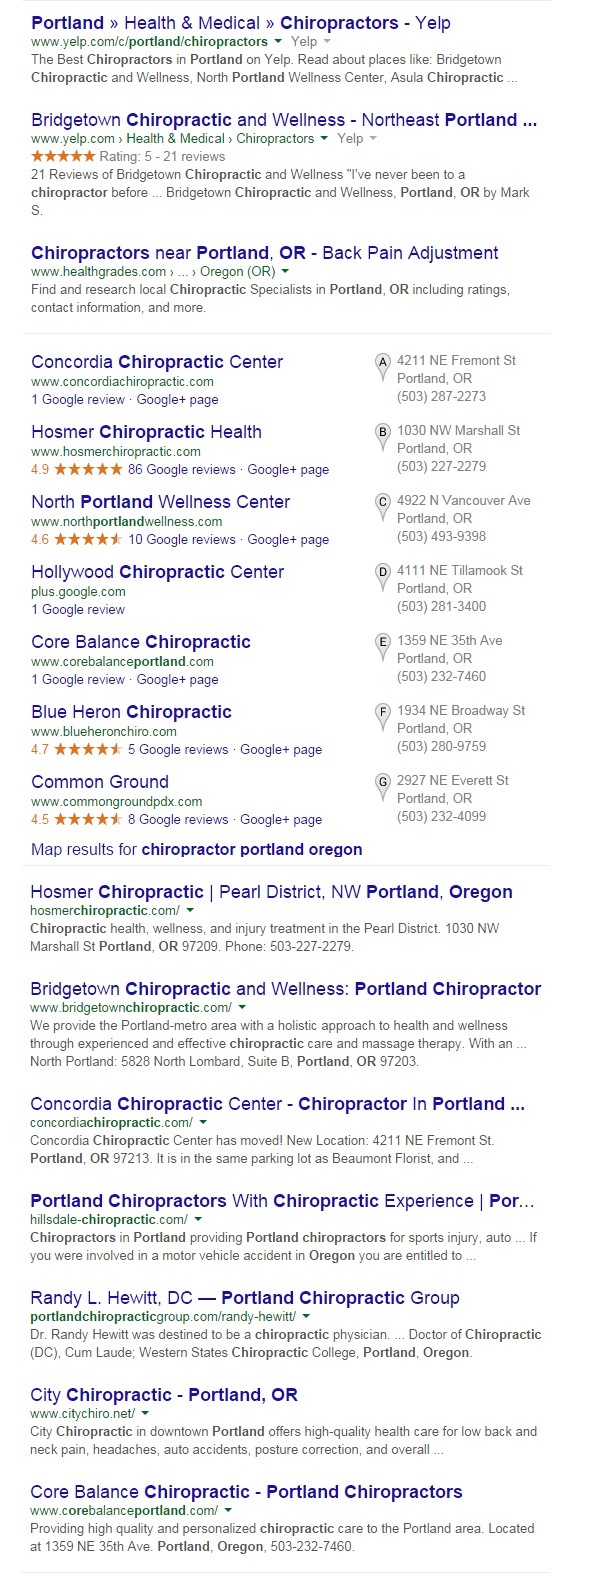 google search for chiropractor portland october 13 2014